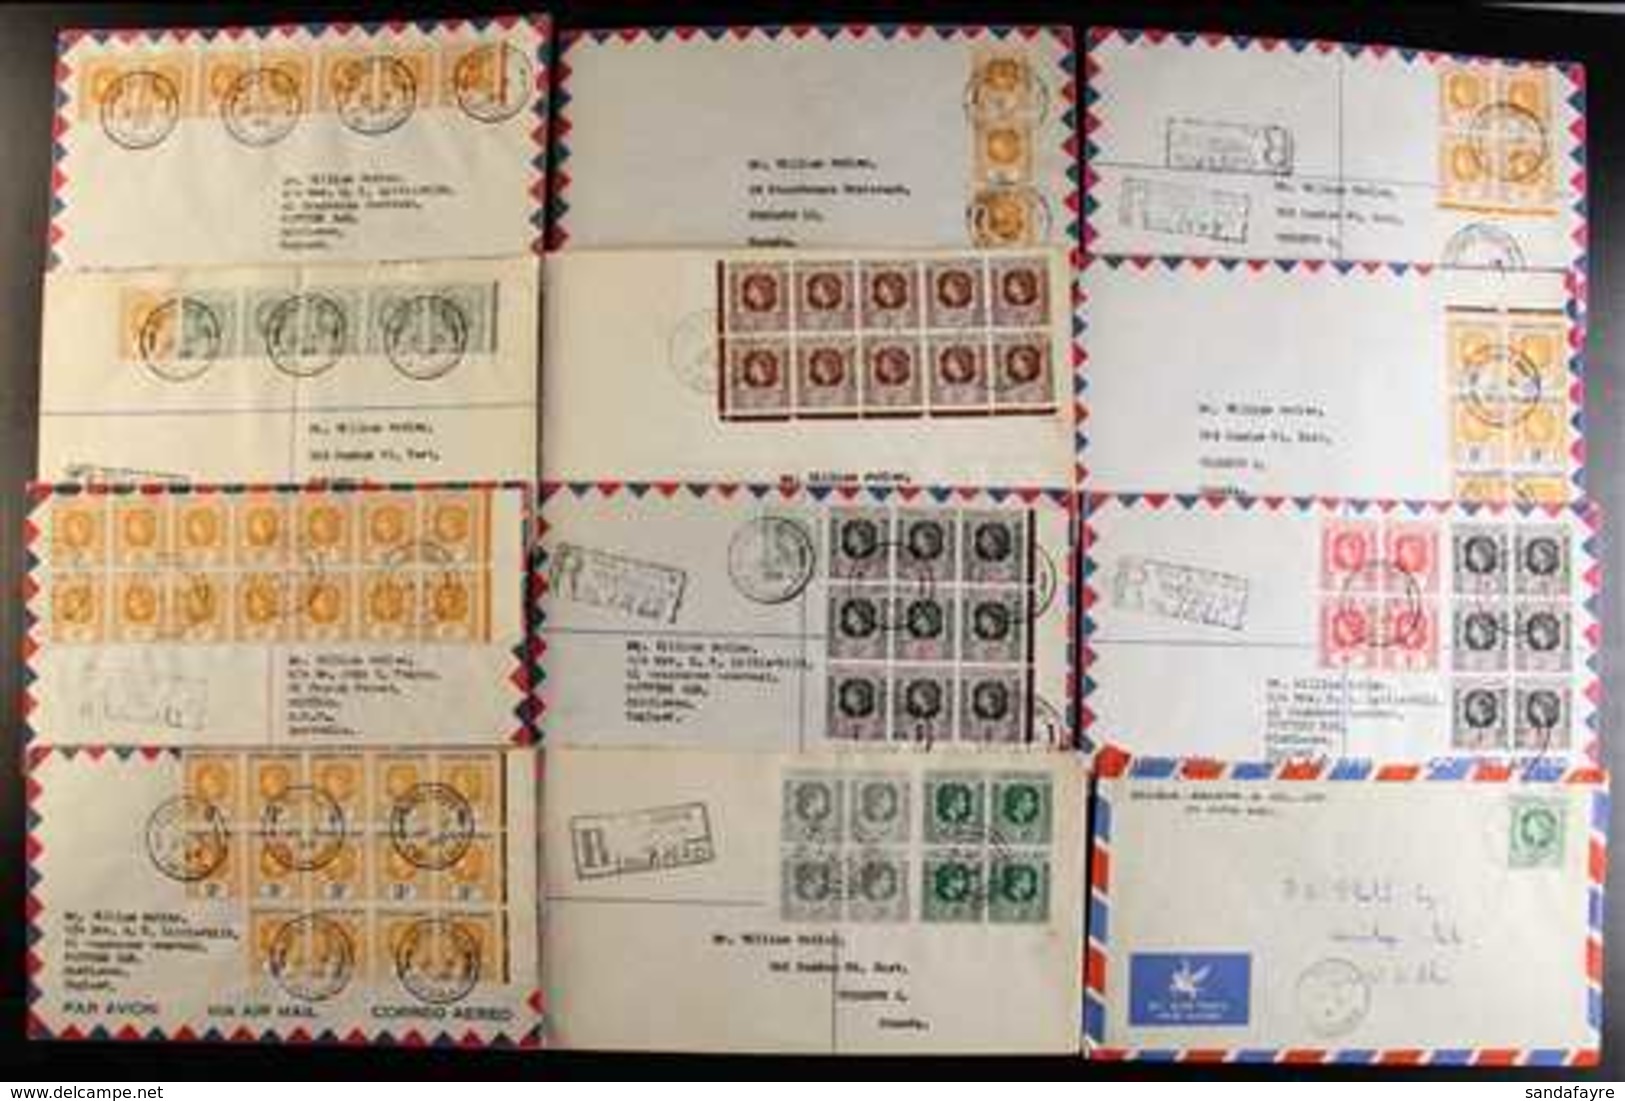 POSTAL HISTORY ACCUMULATION We See A Group Of 20+ Commercial Covers Sent At 1d Or 2c Rate To St. Kitts, Several Nice QEI - Leeward  Islands